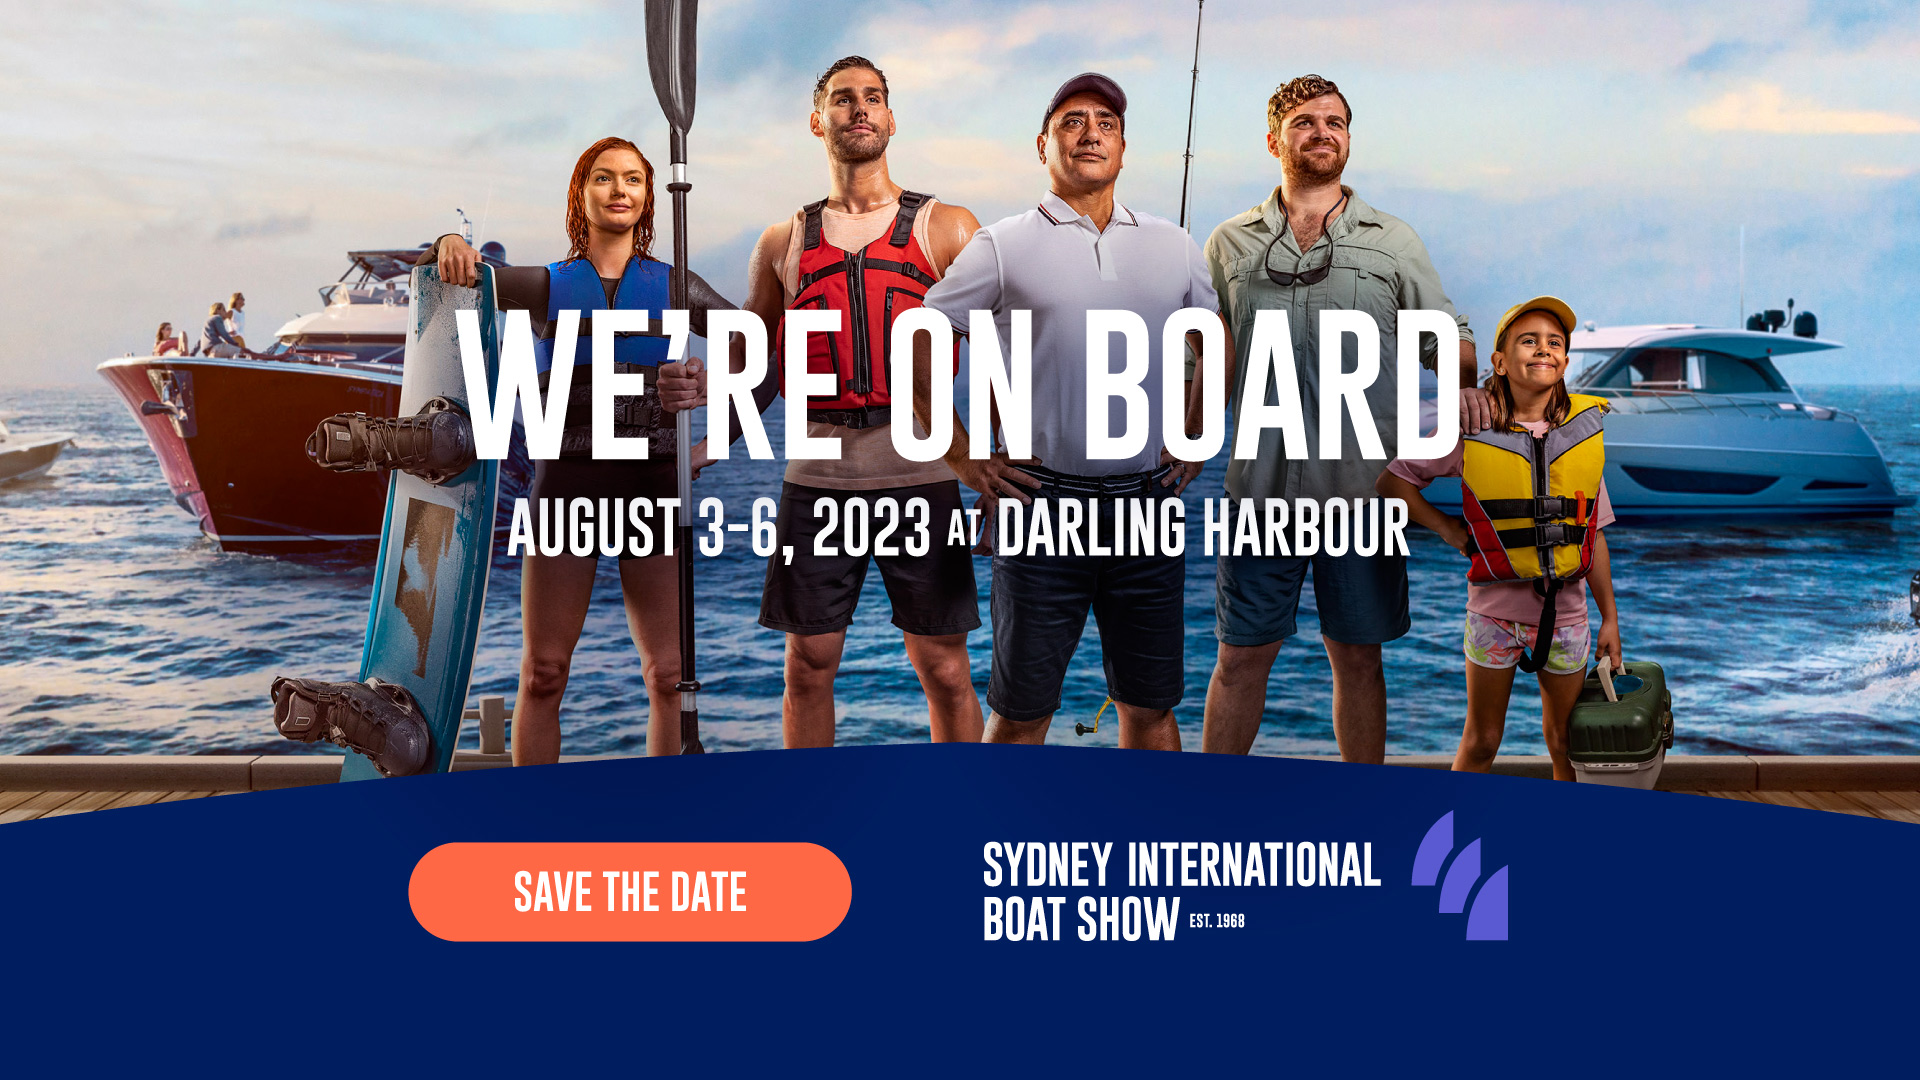 The official poster of the Sydney International Boat Show